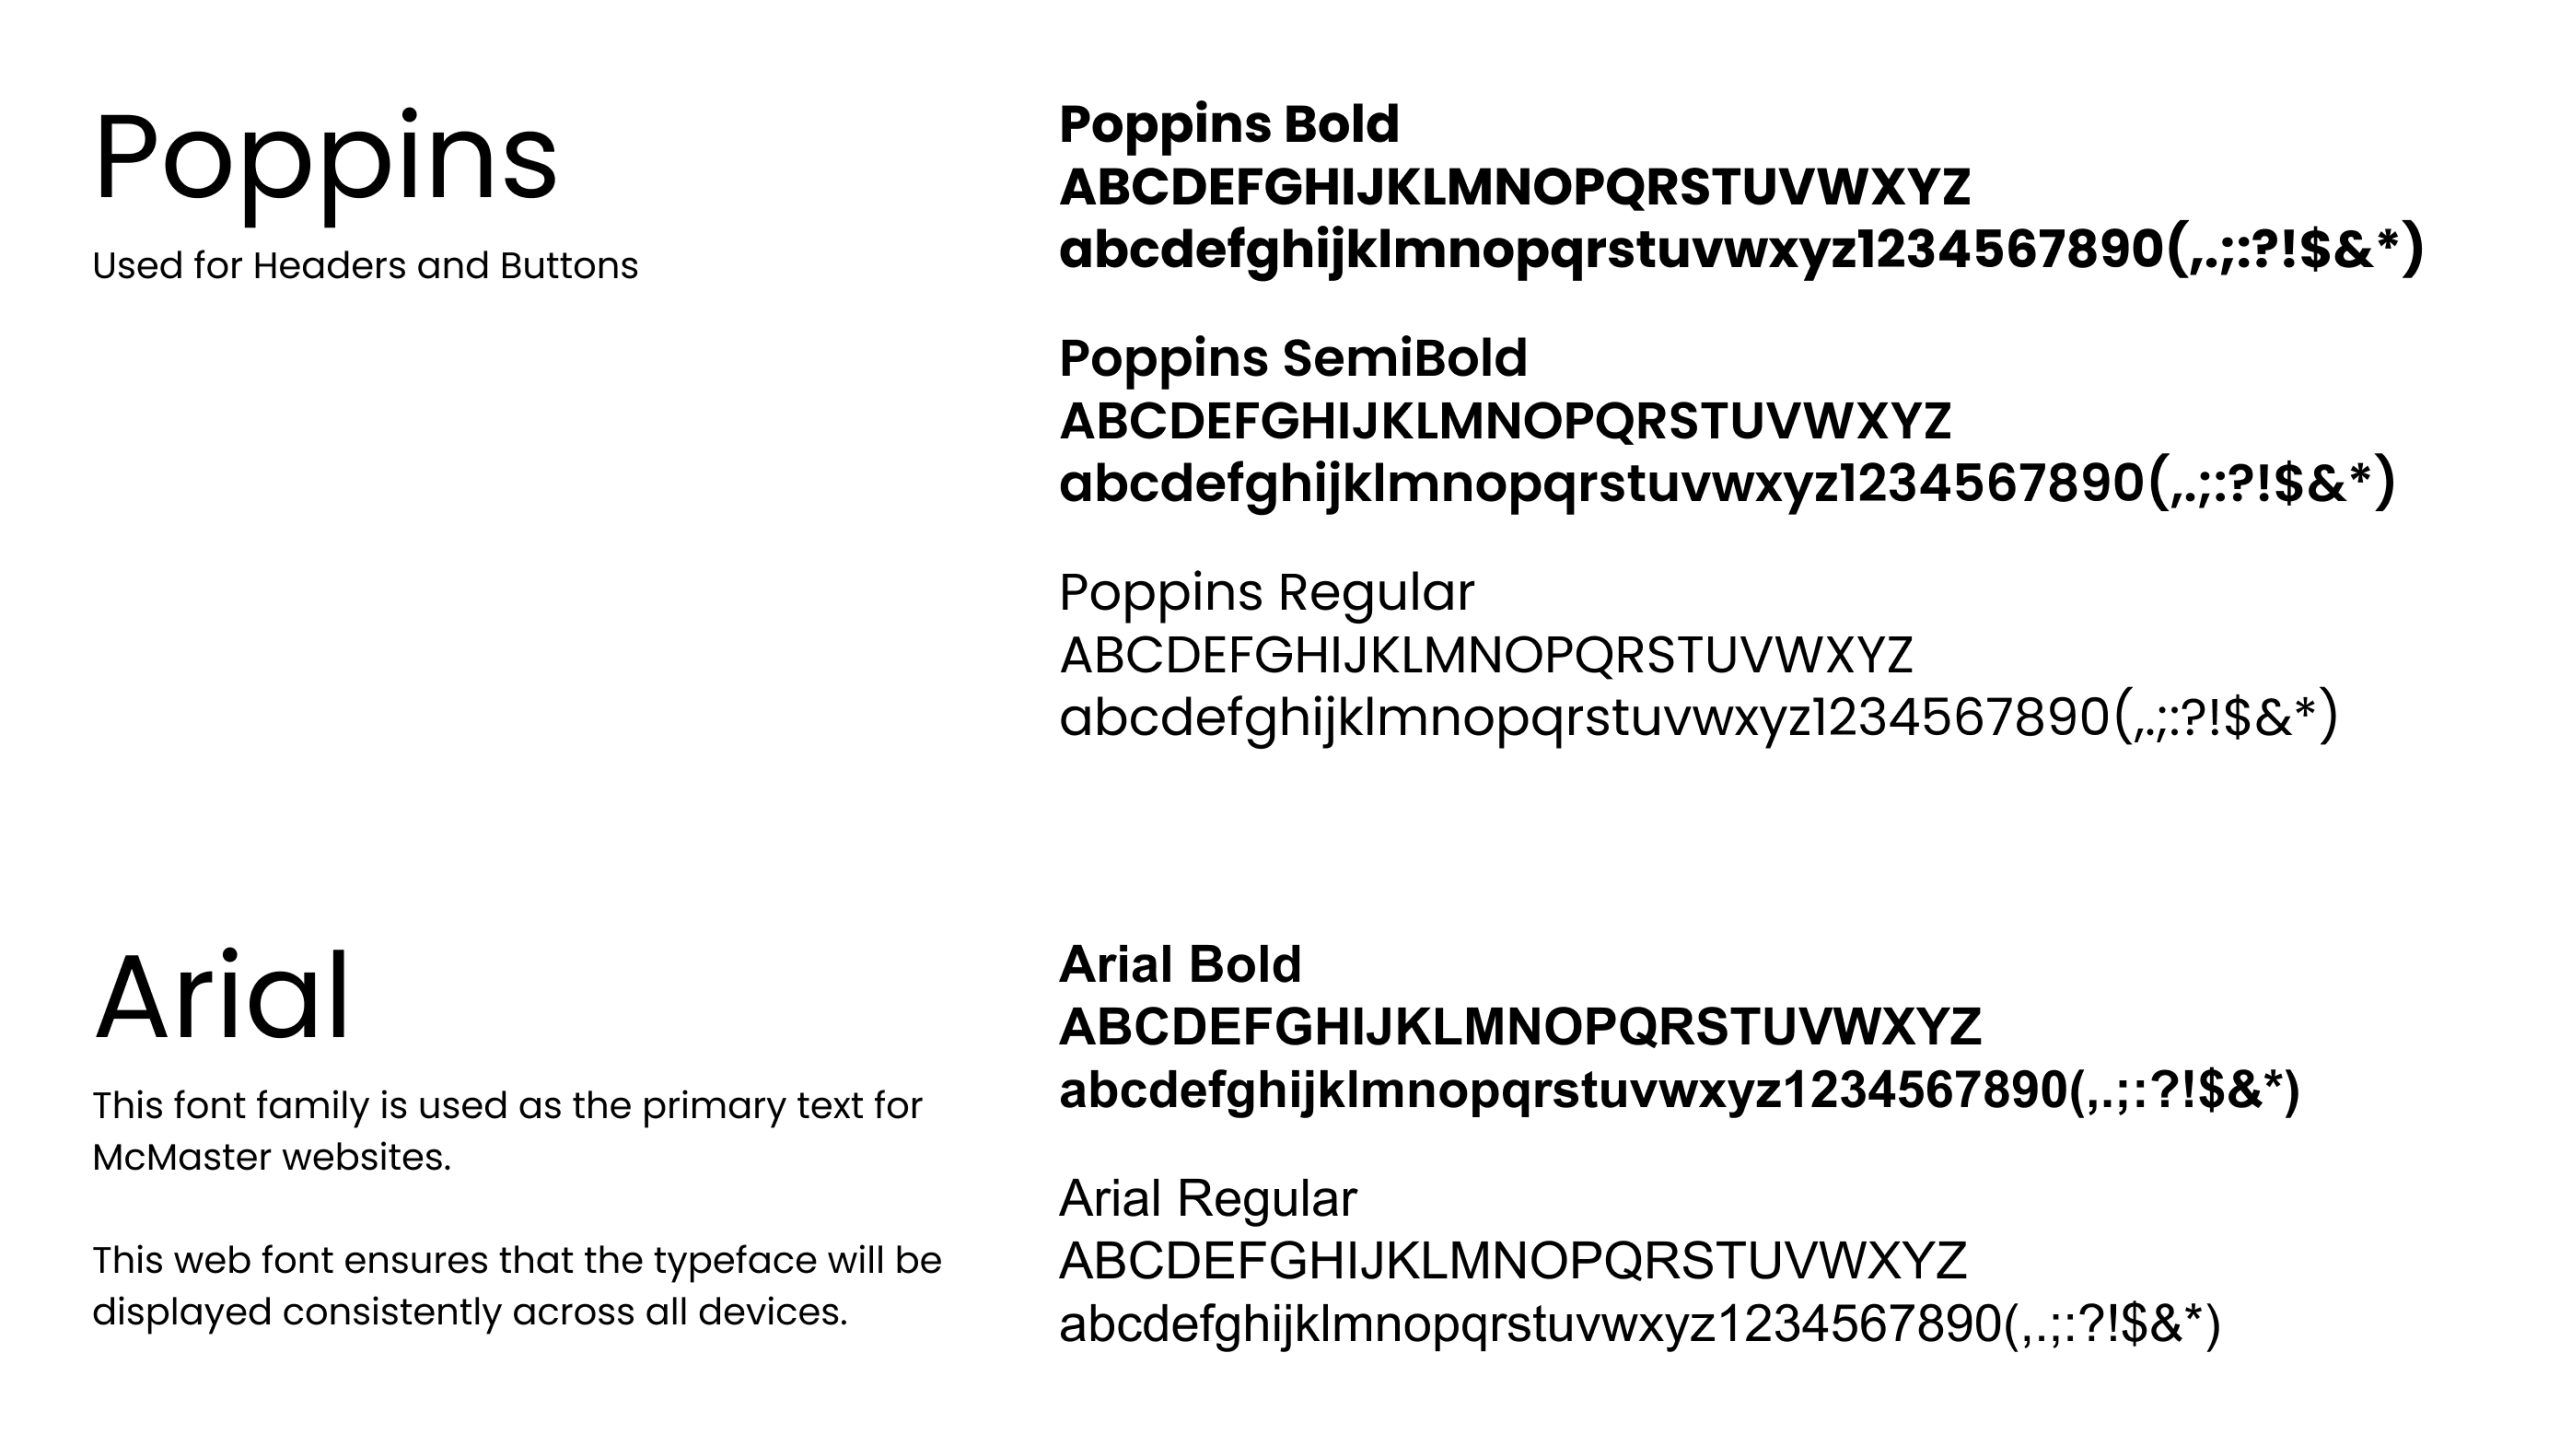 Poppins used for headers and buttons Poppins Bold, Poppins SemiBold, and Poppins Regular Arial used as the primary text for McMaster websites. This web font ensures that the typeface will be displayed consistently across all devices Arial bold and Arial regular